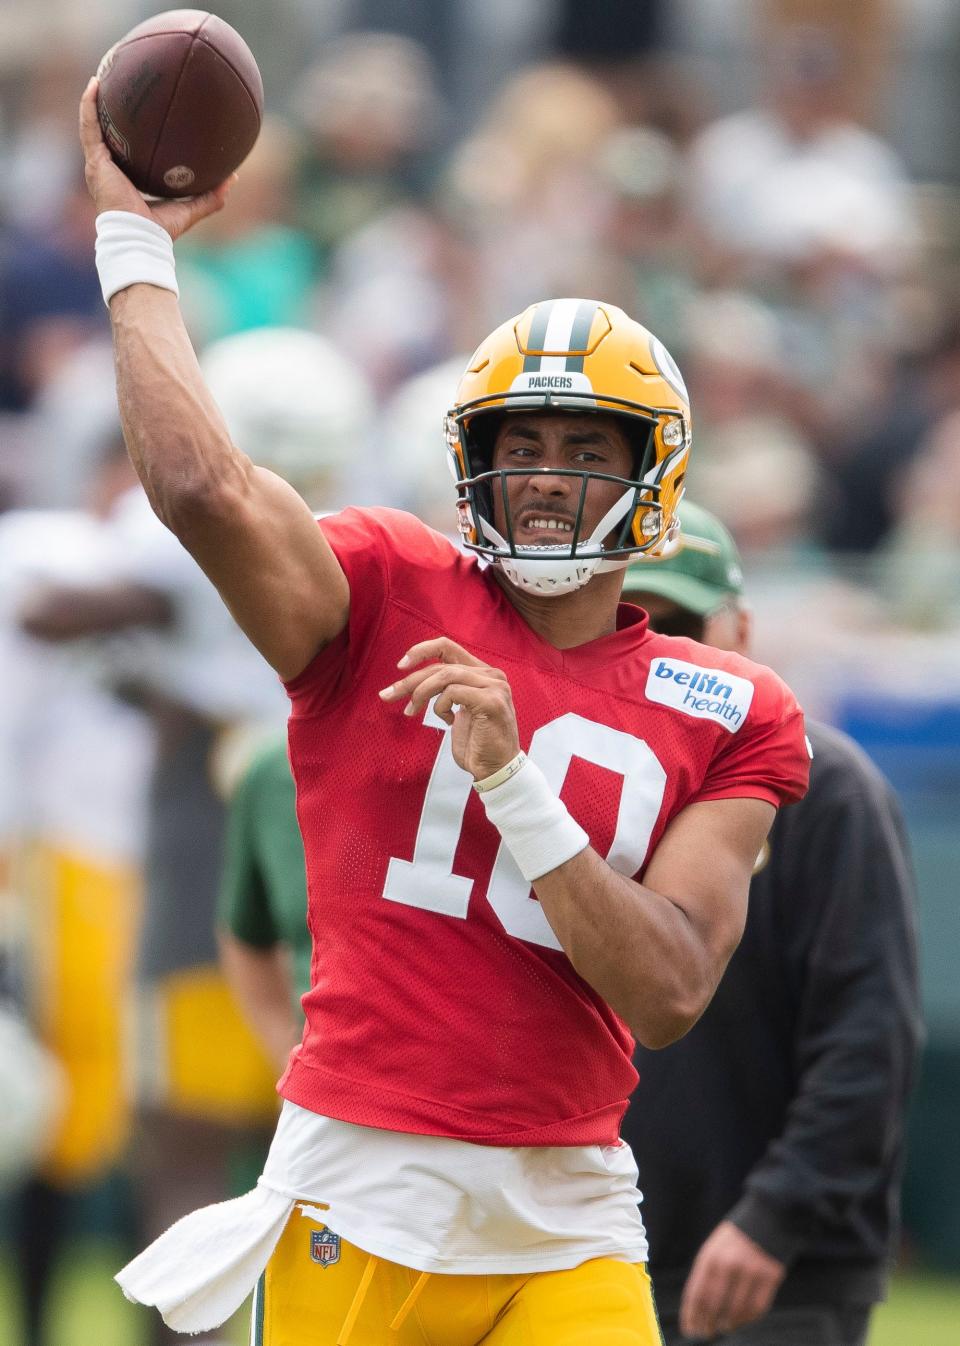 Jordan Love is entering his fourth season with the Green Bay Packers but first as the starting quarterback. He and the offense, not surprisingly have experienced some ups and downs during training camp. His play led to CBS Sports Network's Adam Shein trashing Love in a hot take that has gone viral.